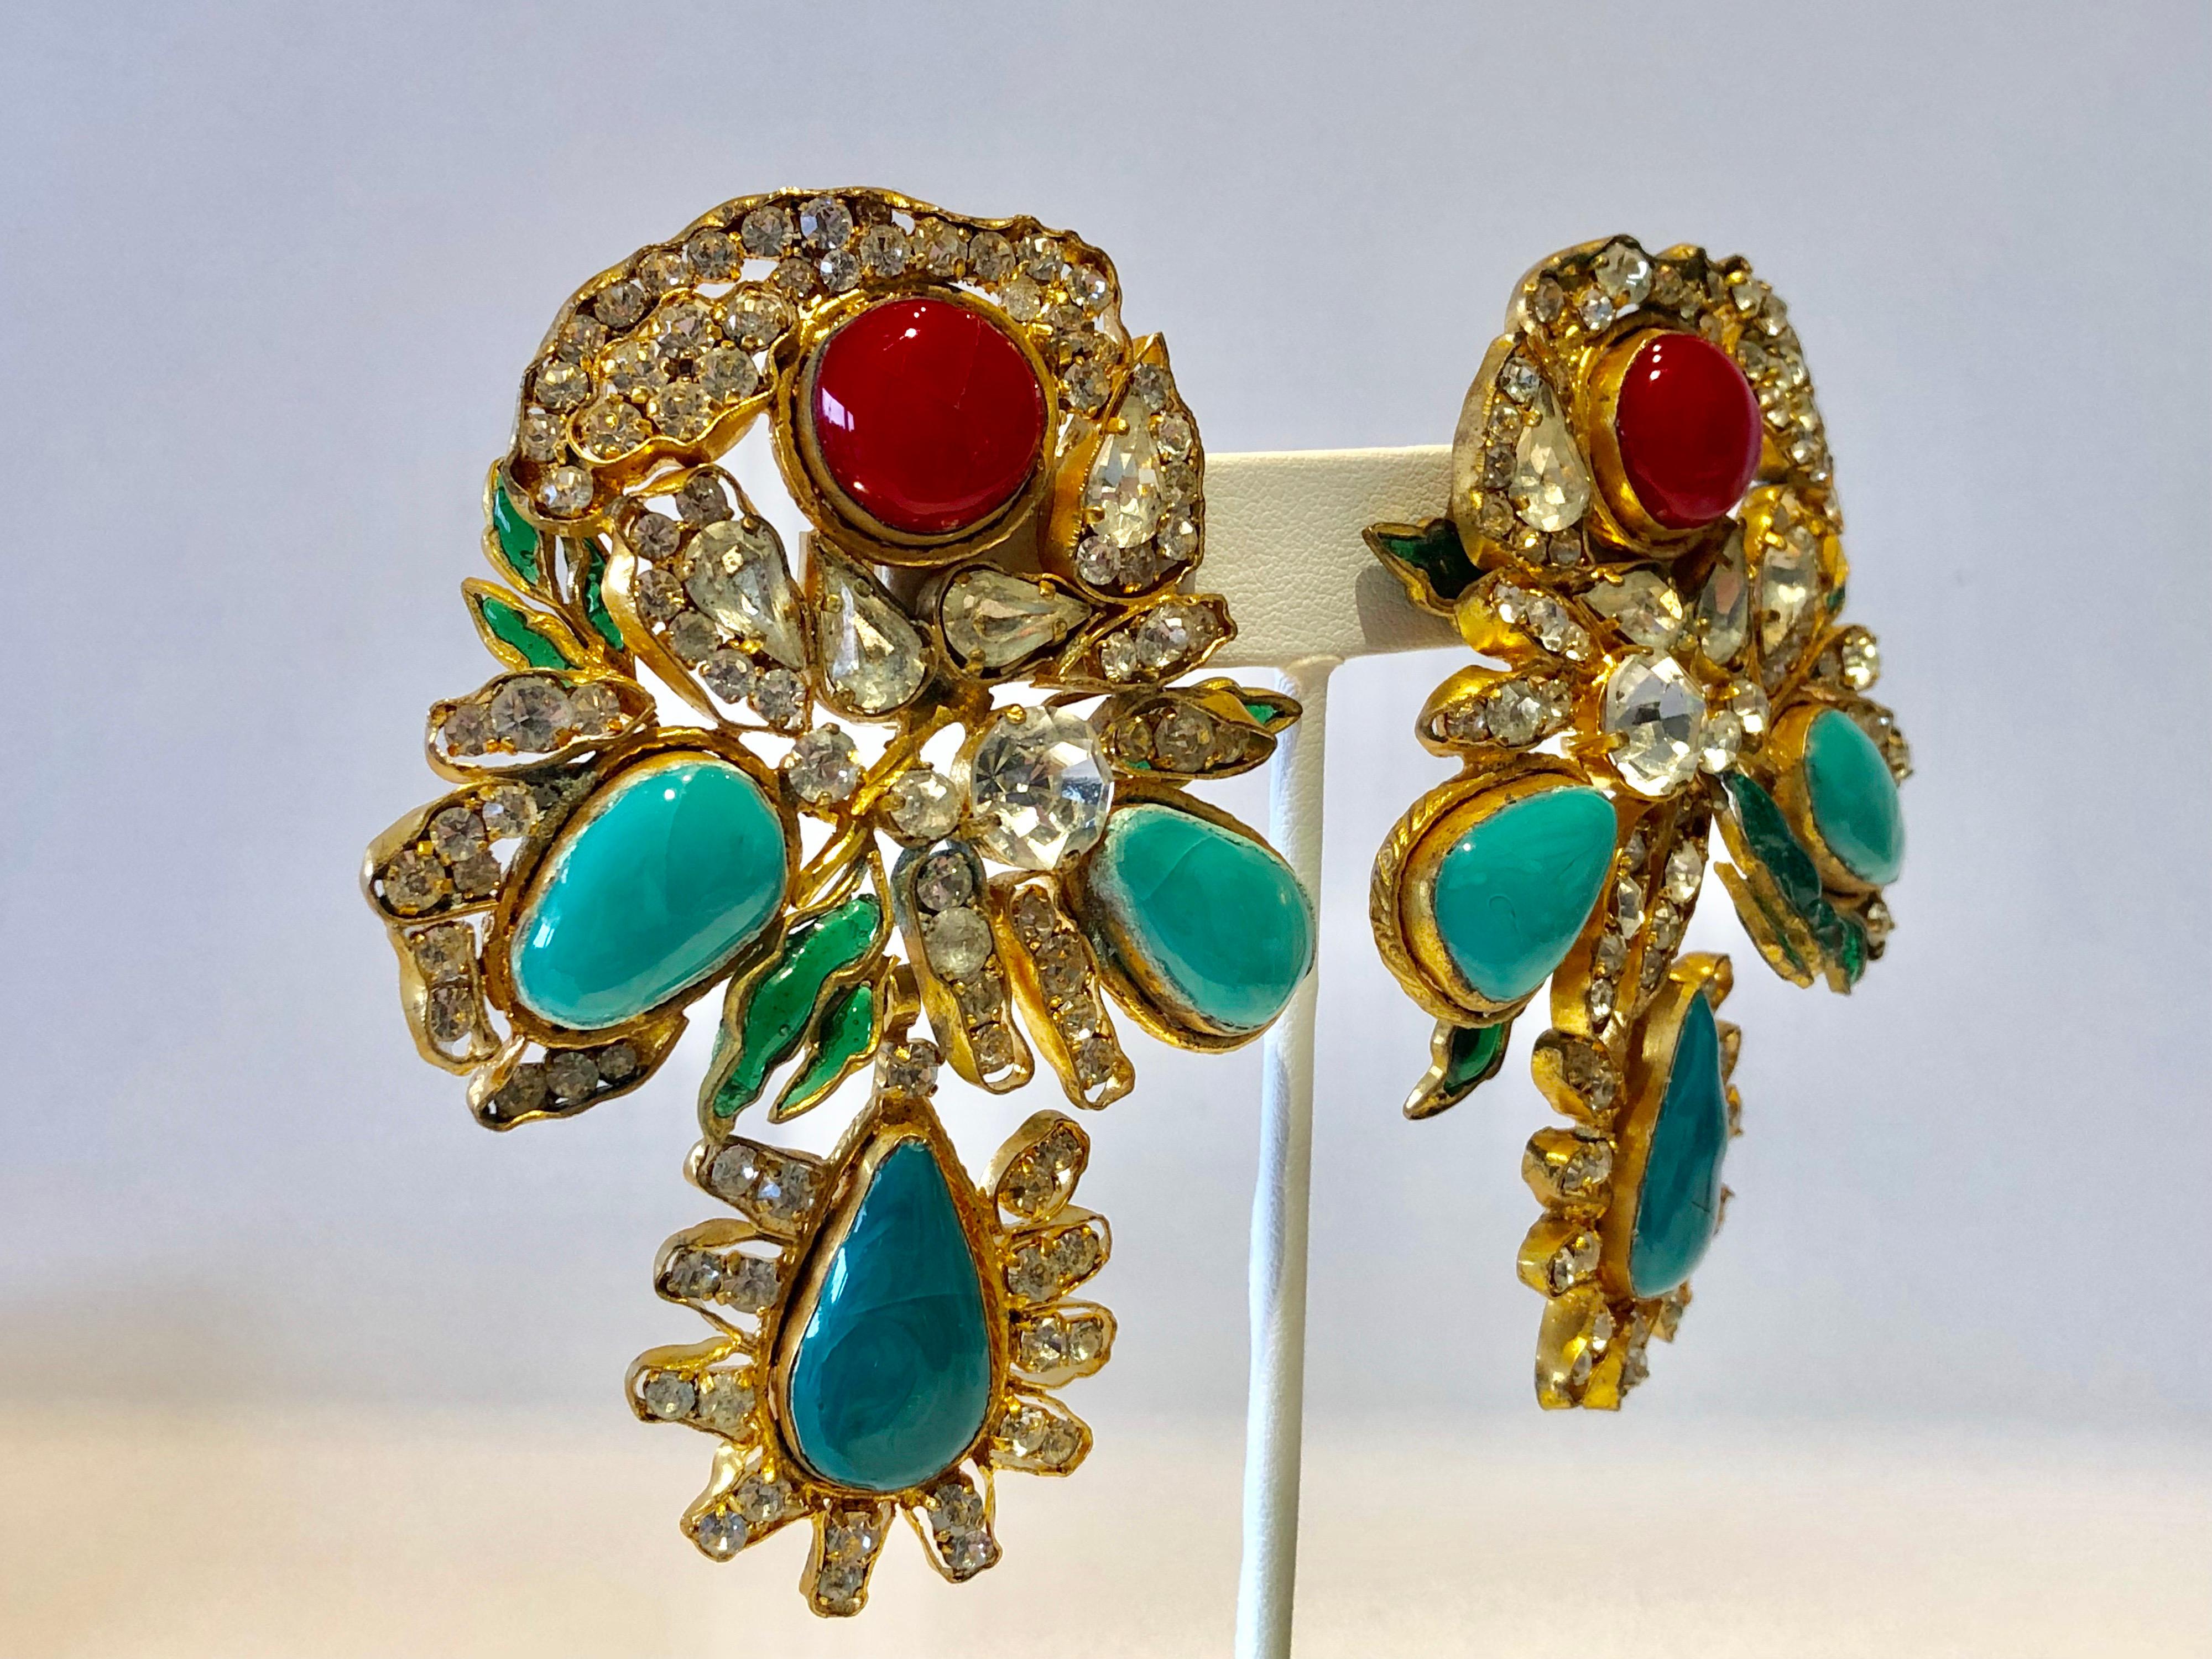 Vintage Yves Saint Laurent Haute Couture Mughal Statement Earrings  2